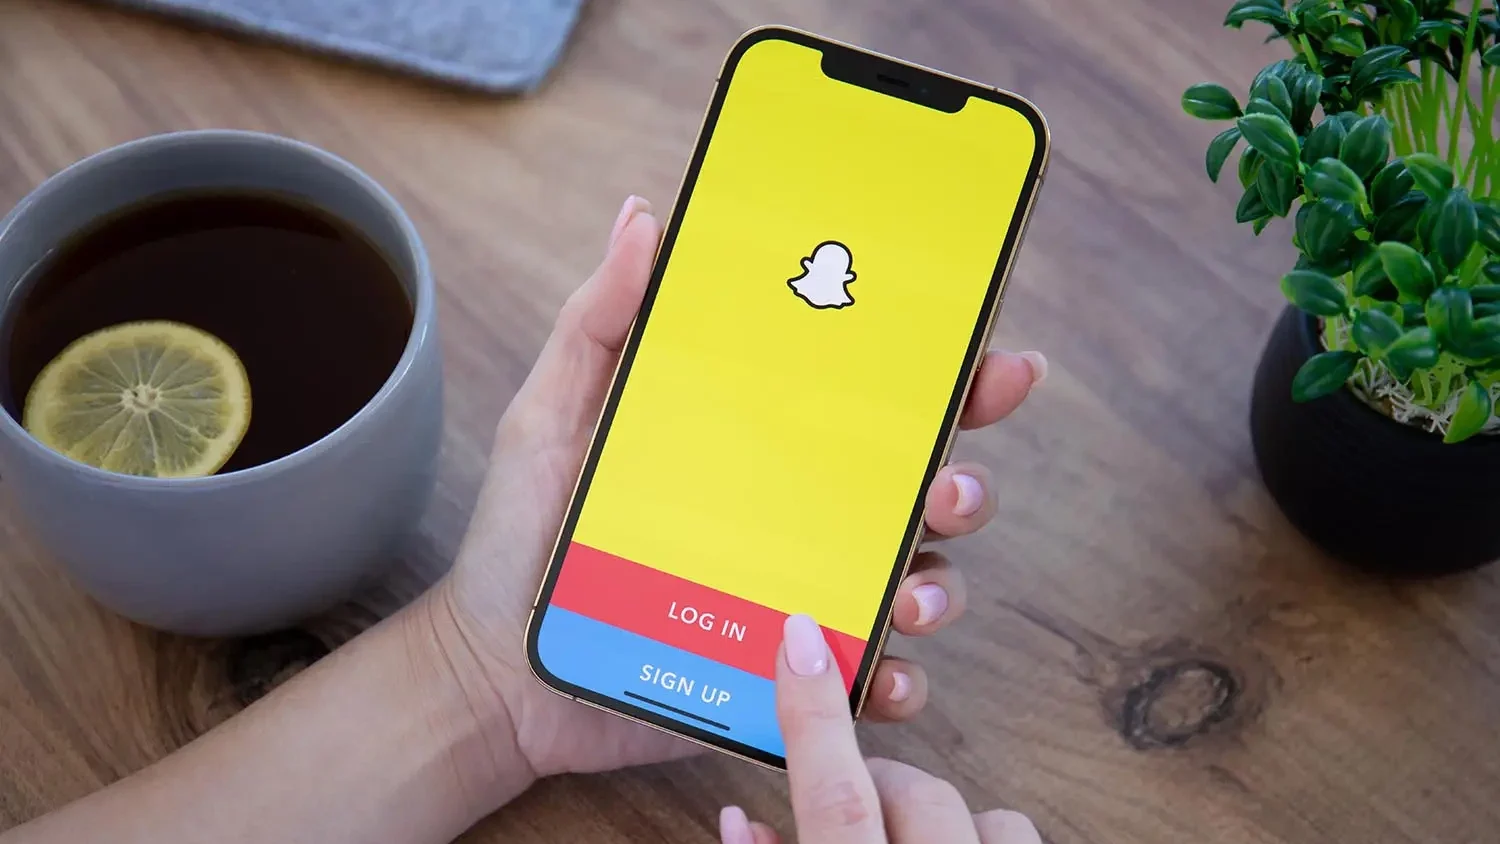 How To Refresh Quick Add On Snapchat? 1 Simple Method To Try!